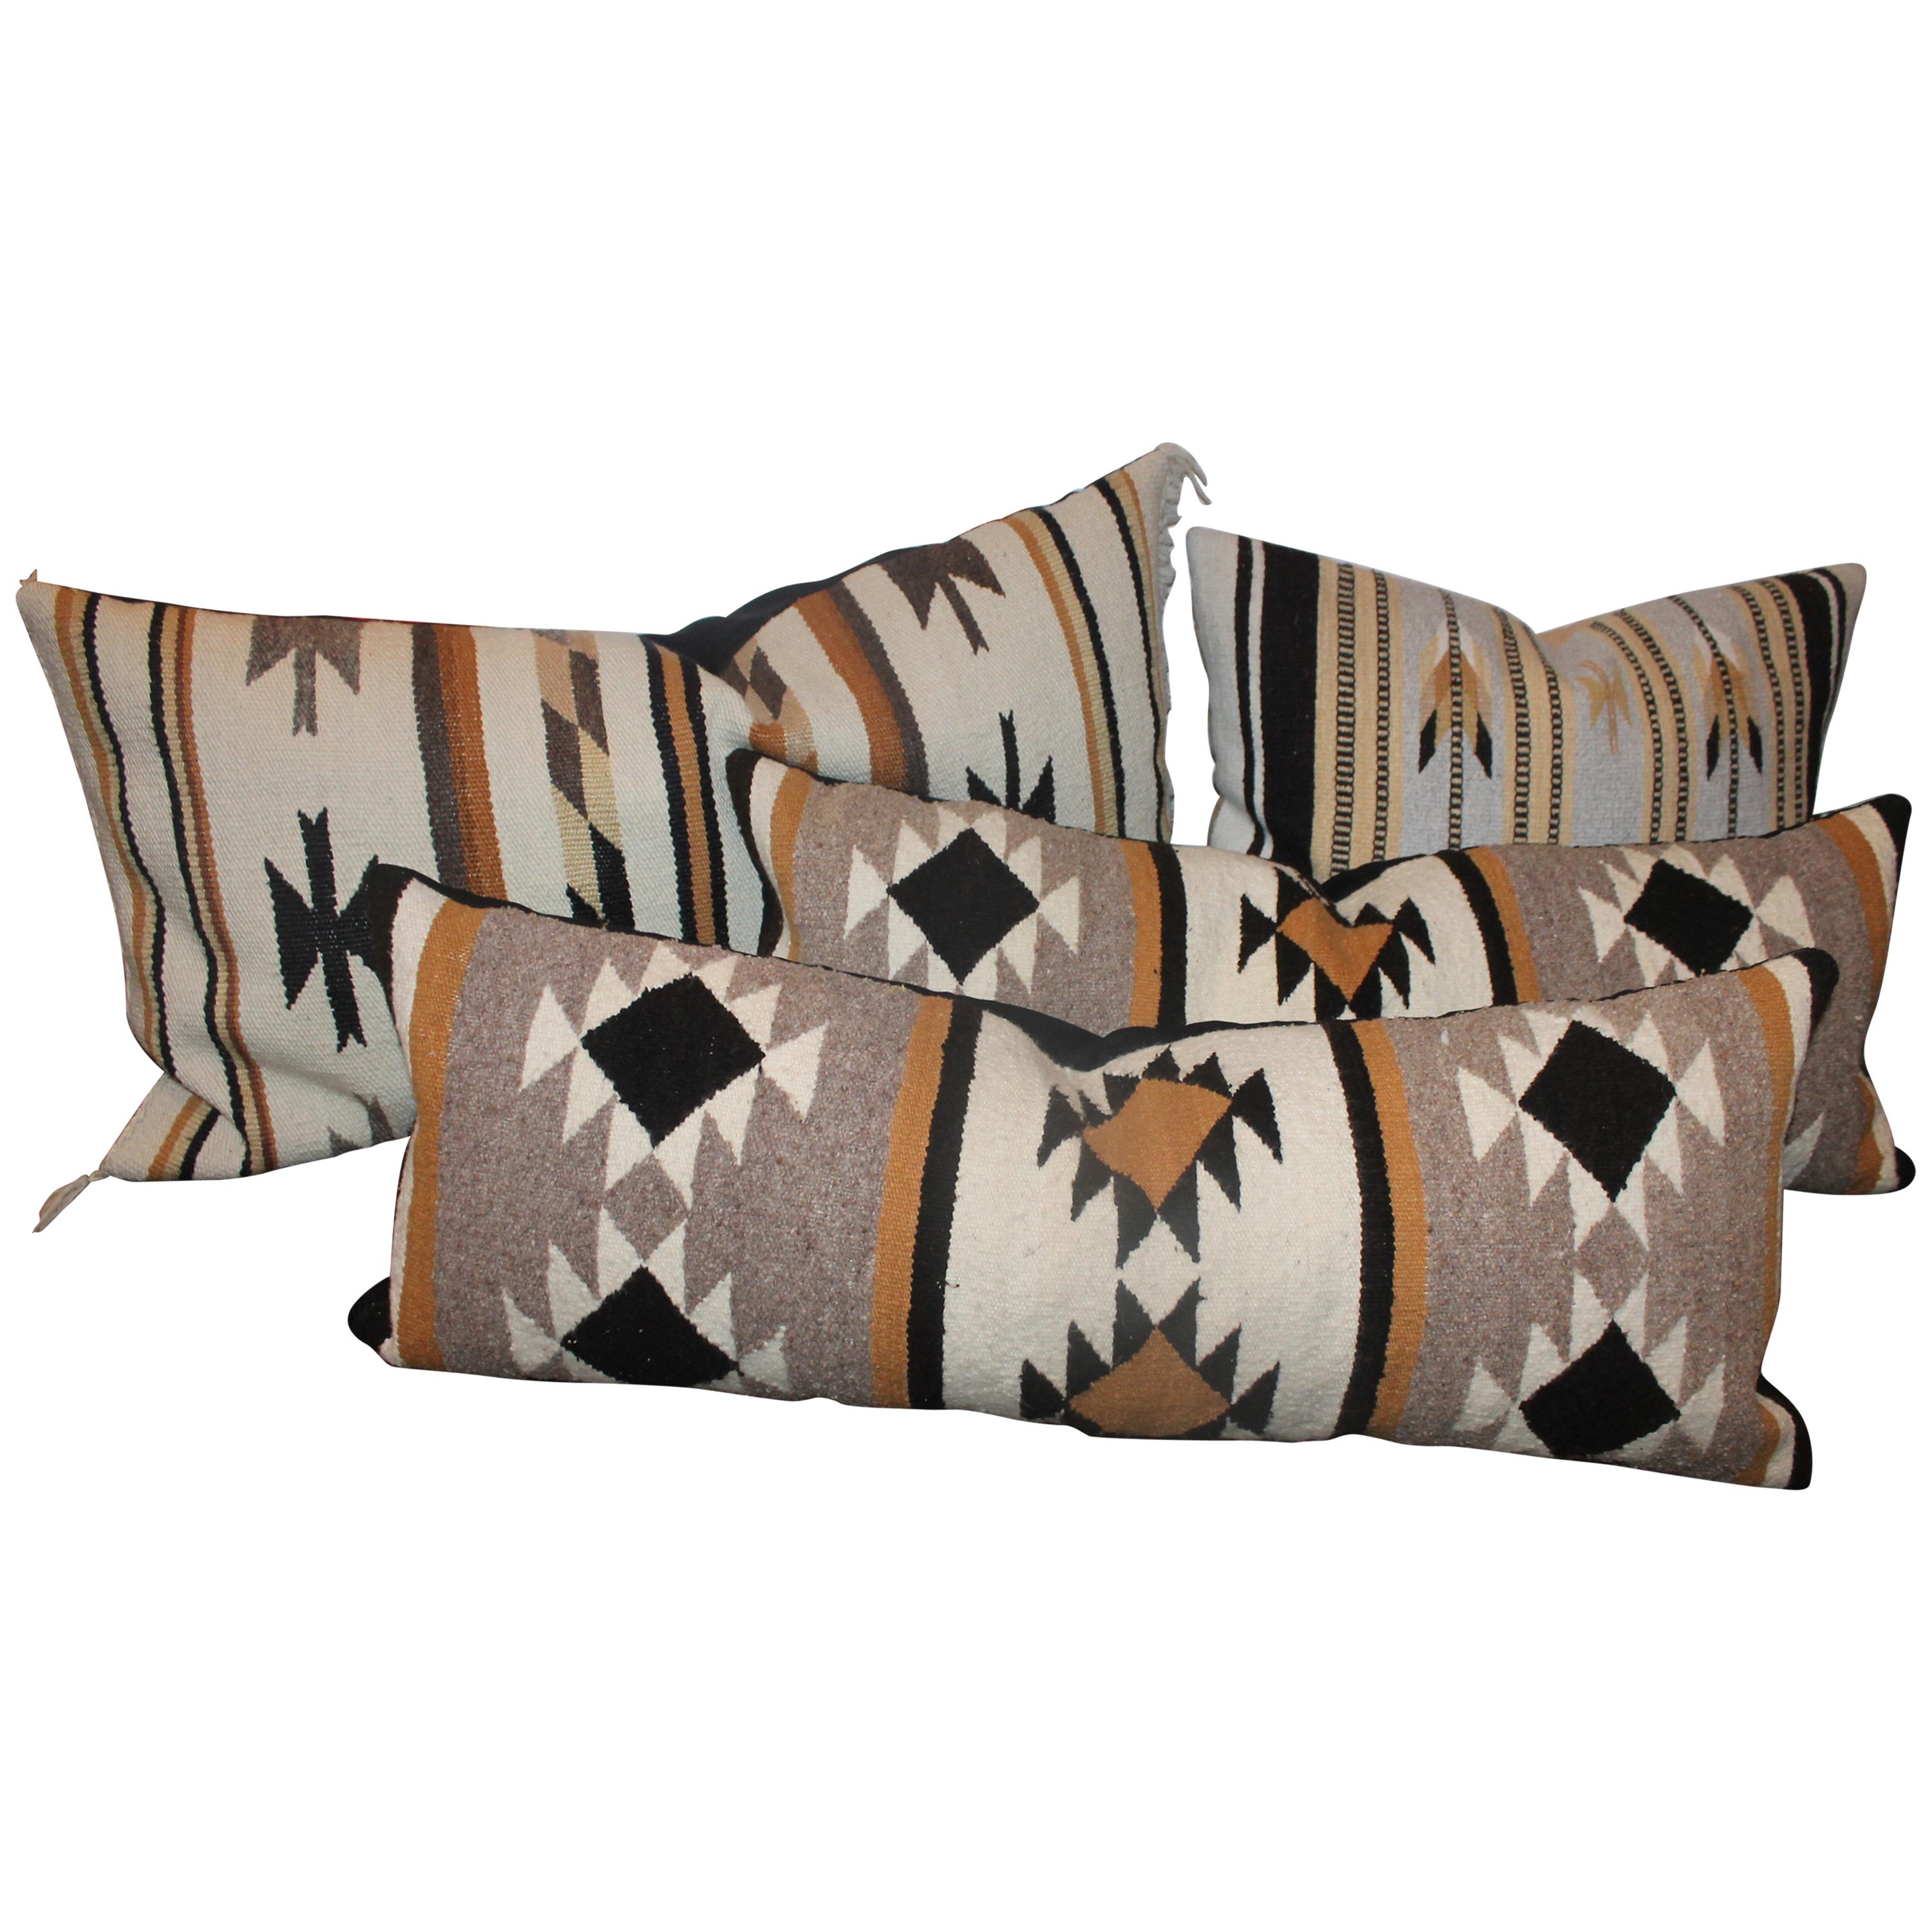 Chinle Navajo Indian Weaving Pillows, Collection of Four